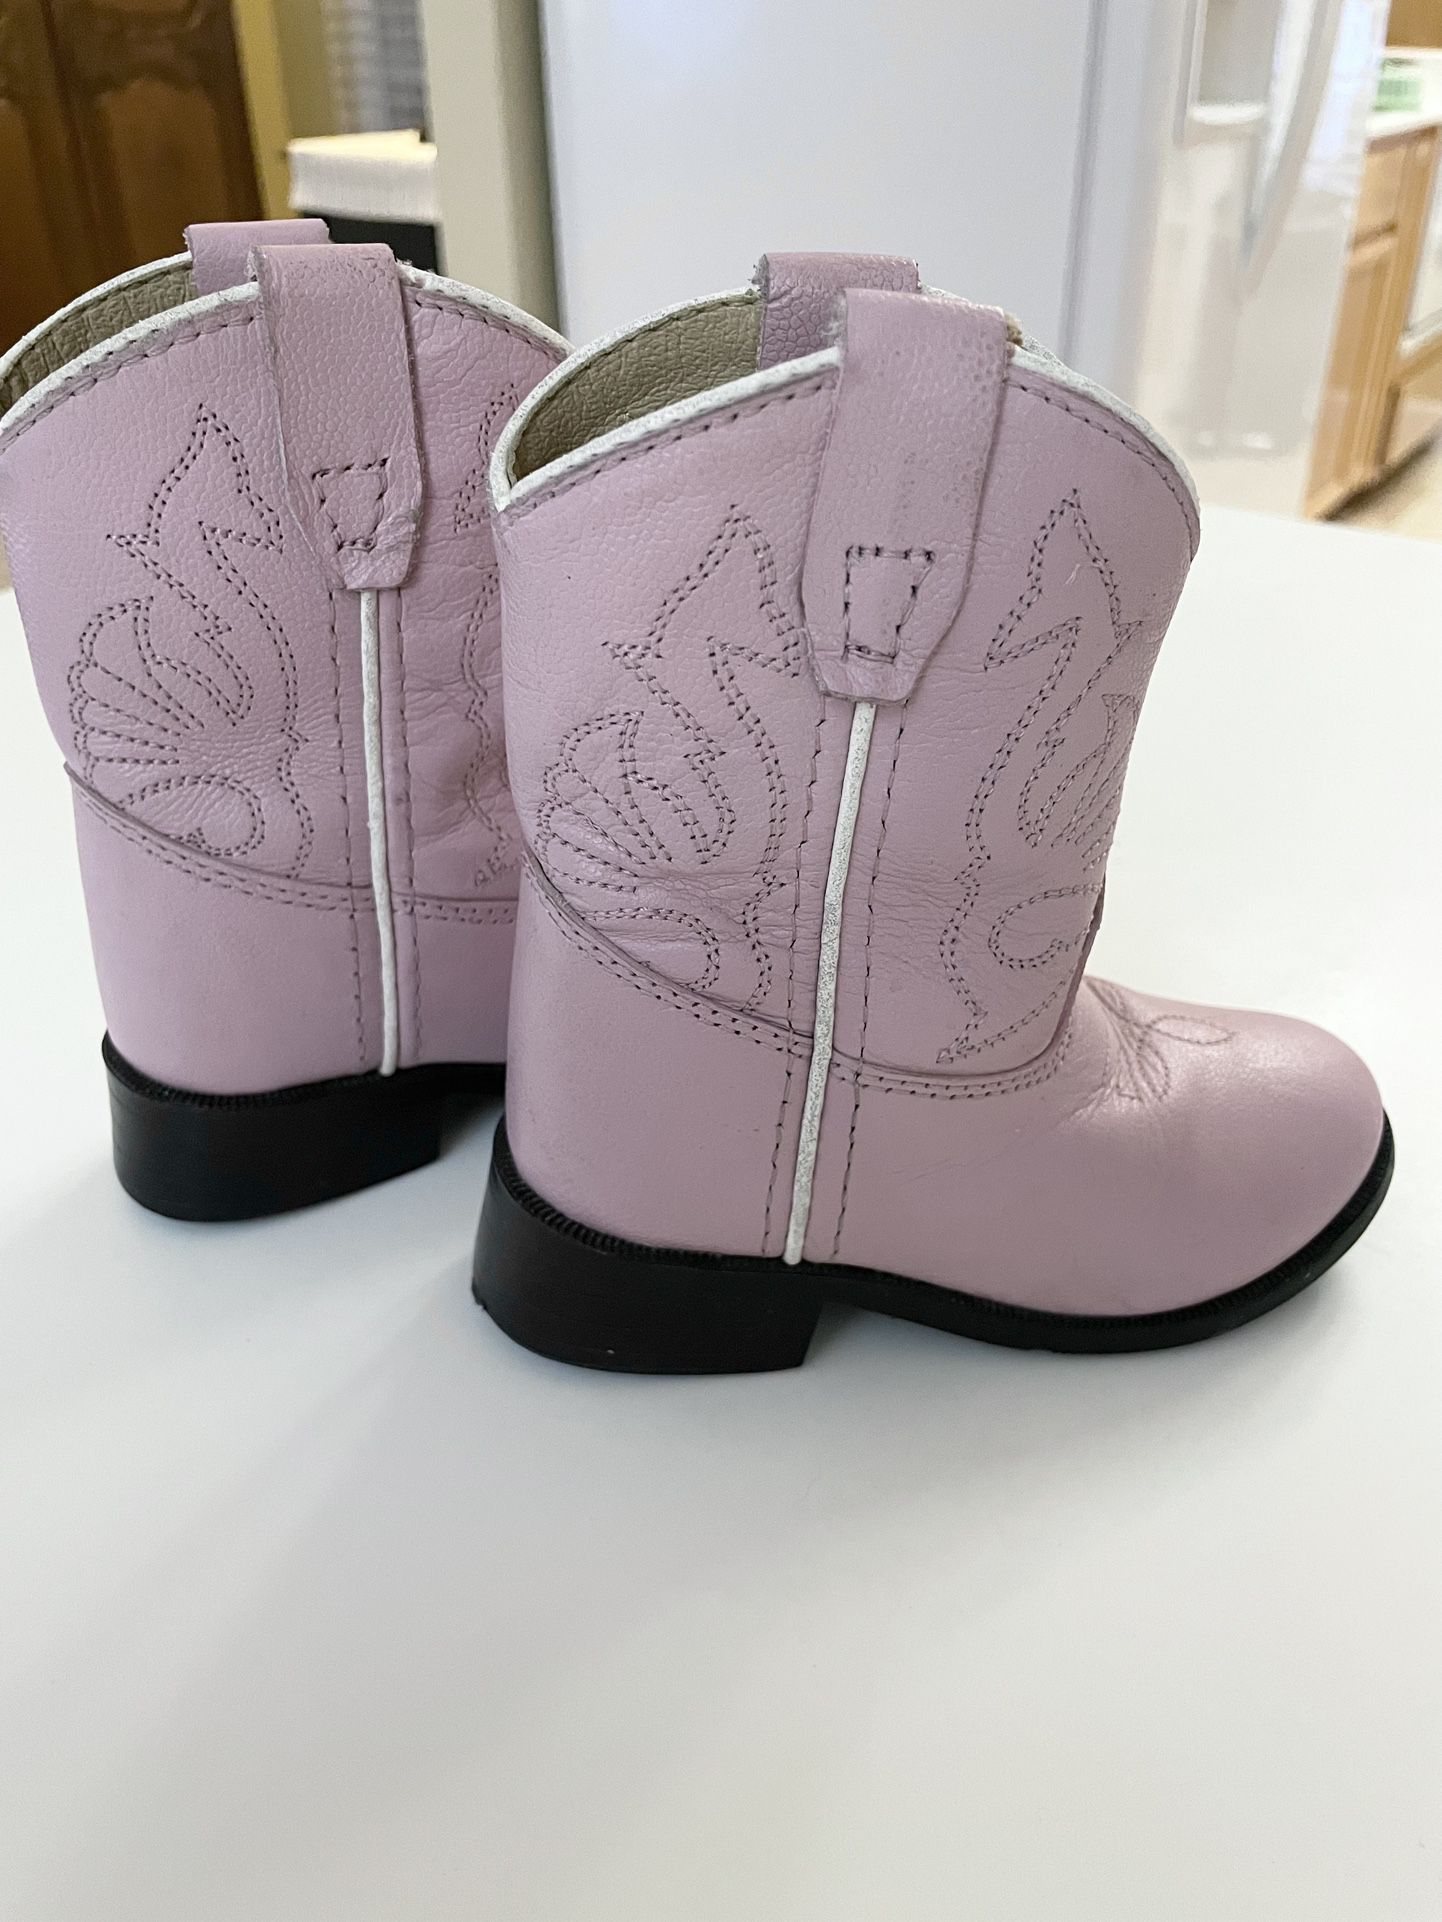 Masterson Boot Co. Girls Leather Pink Cowboy Boots Size 5 RB2002